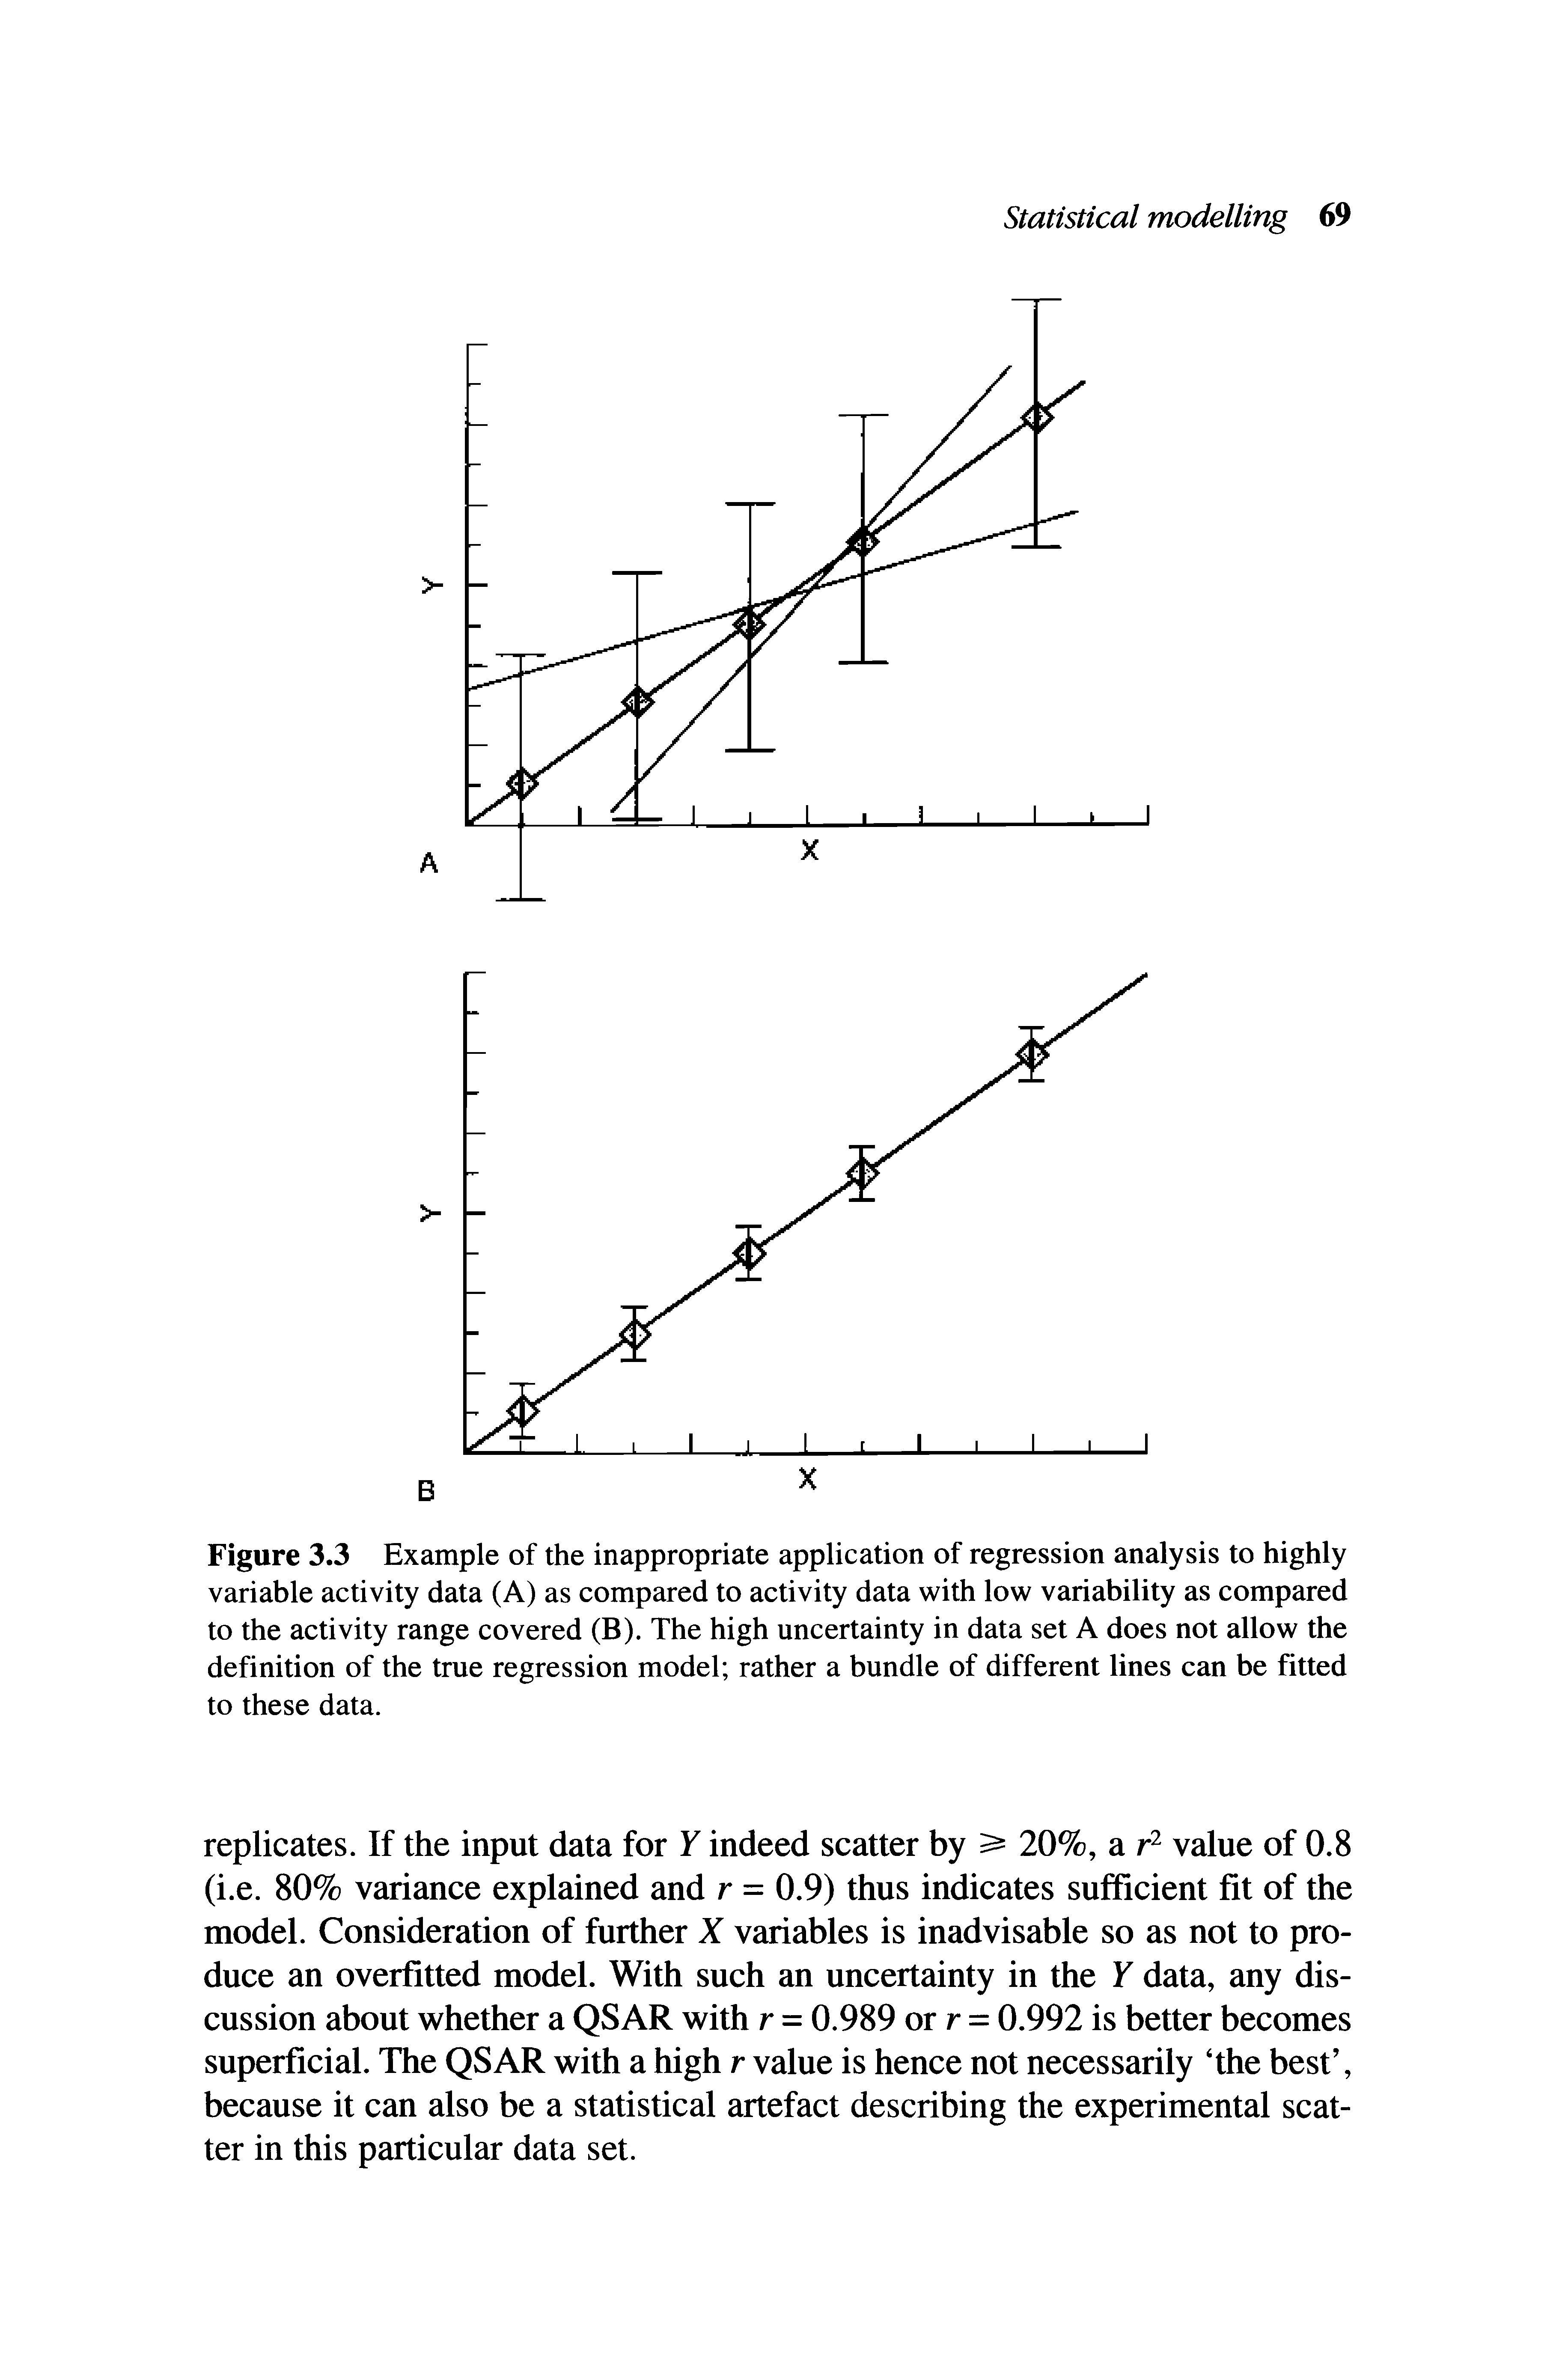 Figure 3.3 Example of the inappropriate application of regression analysis to highly variable activity data (A) as compared to activity data with low variability as compared to the activity range covered (B). The high uncertainty in data set A does not allow the definition of the true regression model rather a bundle of different lines can be fitted to these data.